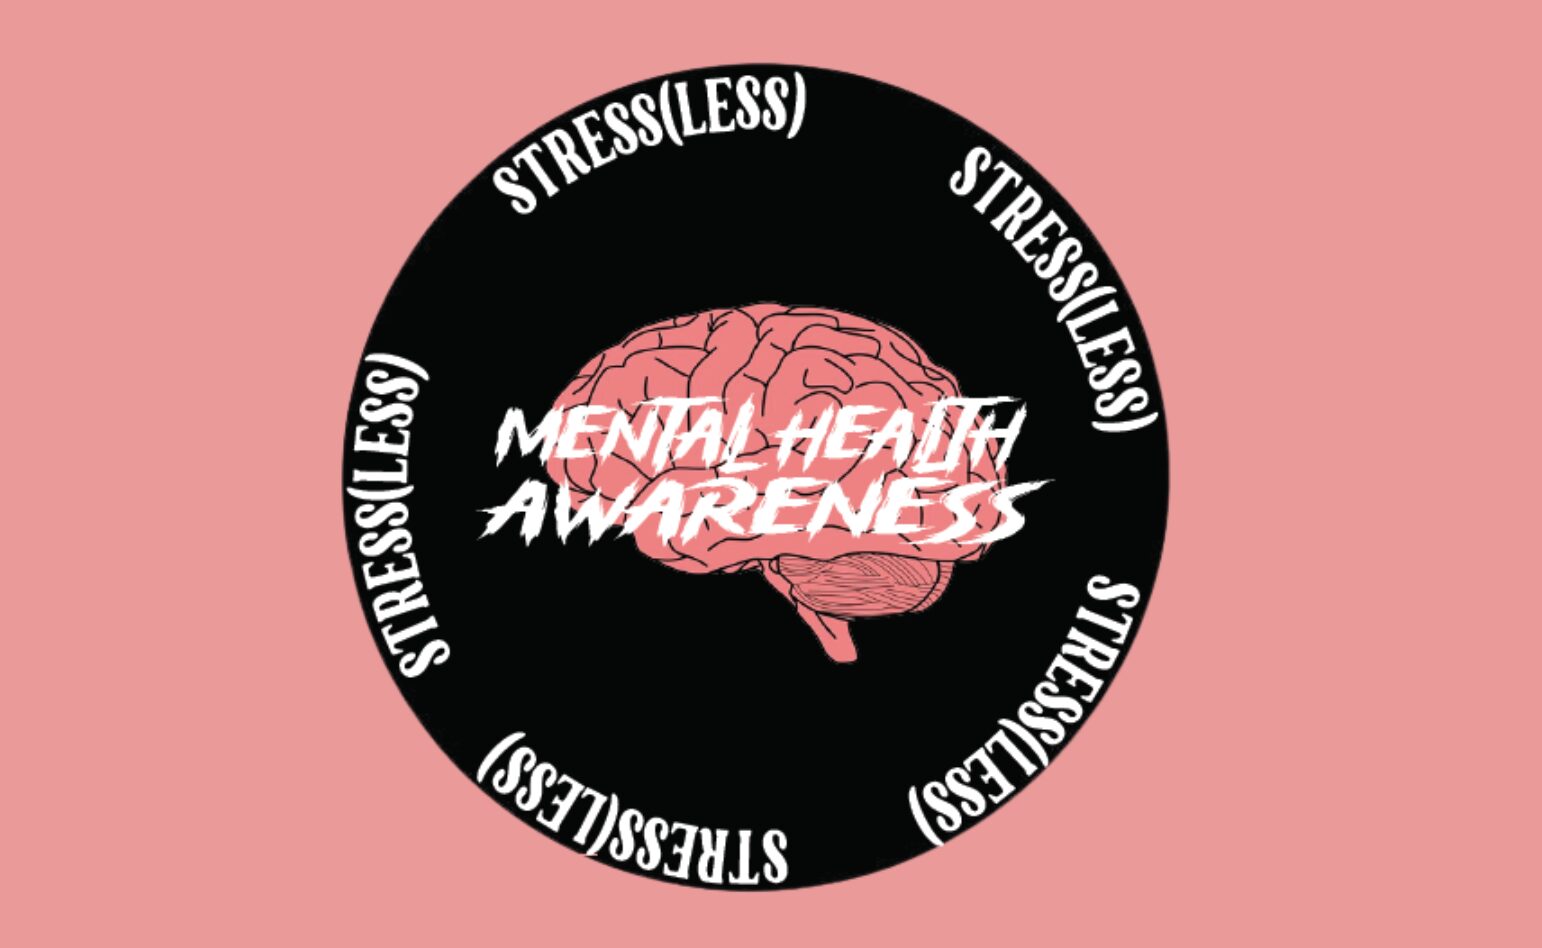 Logo for Stress(Less) that has the test "Mental Health Awareness" over an illustration of a brain 